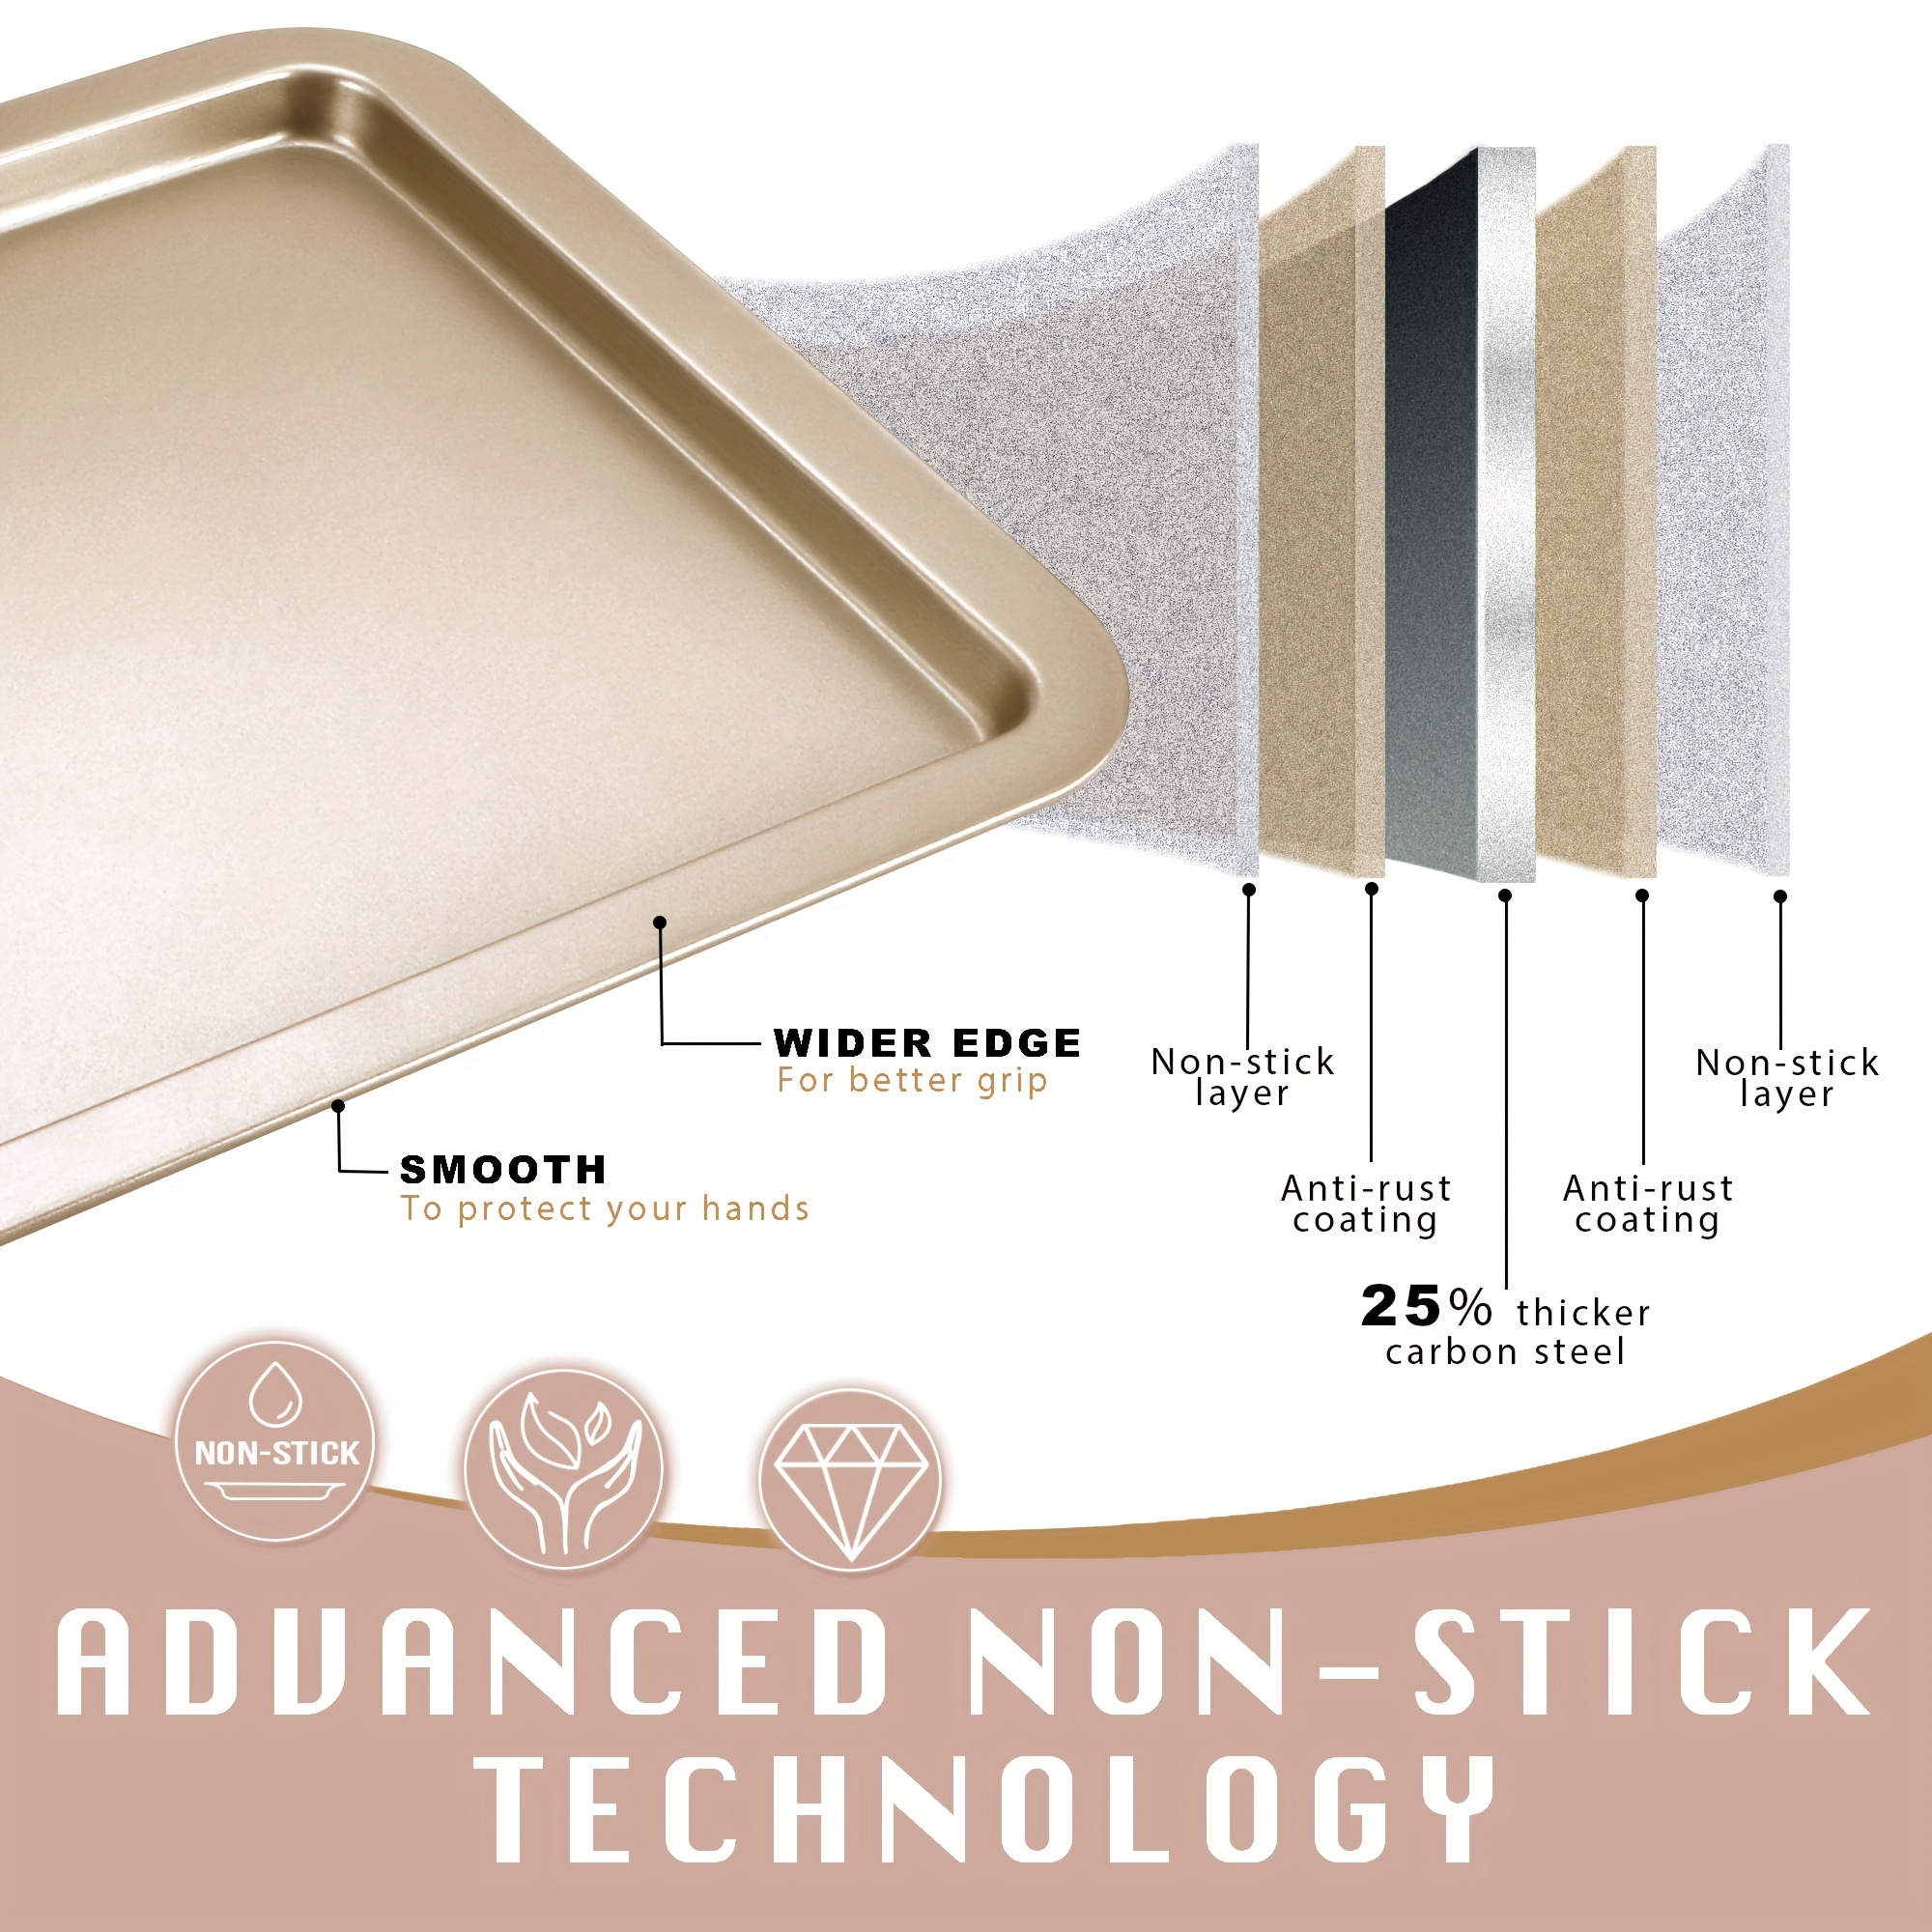 Nordic Ware 3 Piece Nonstick Baking Sheet and Cooling Rack Set (Gold)